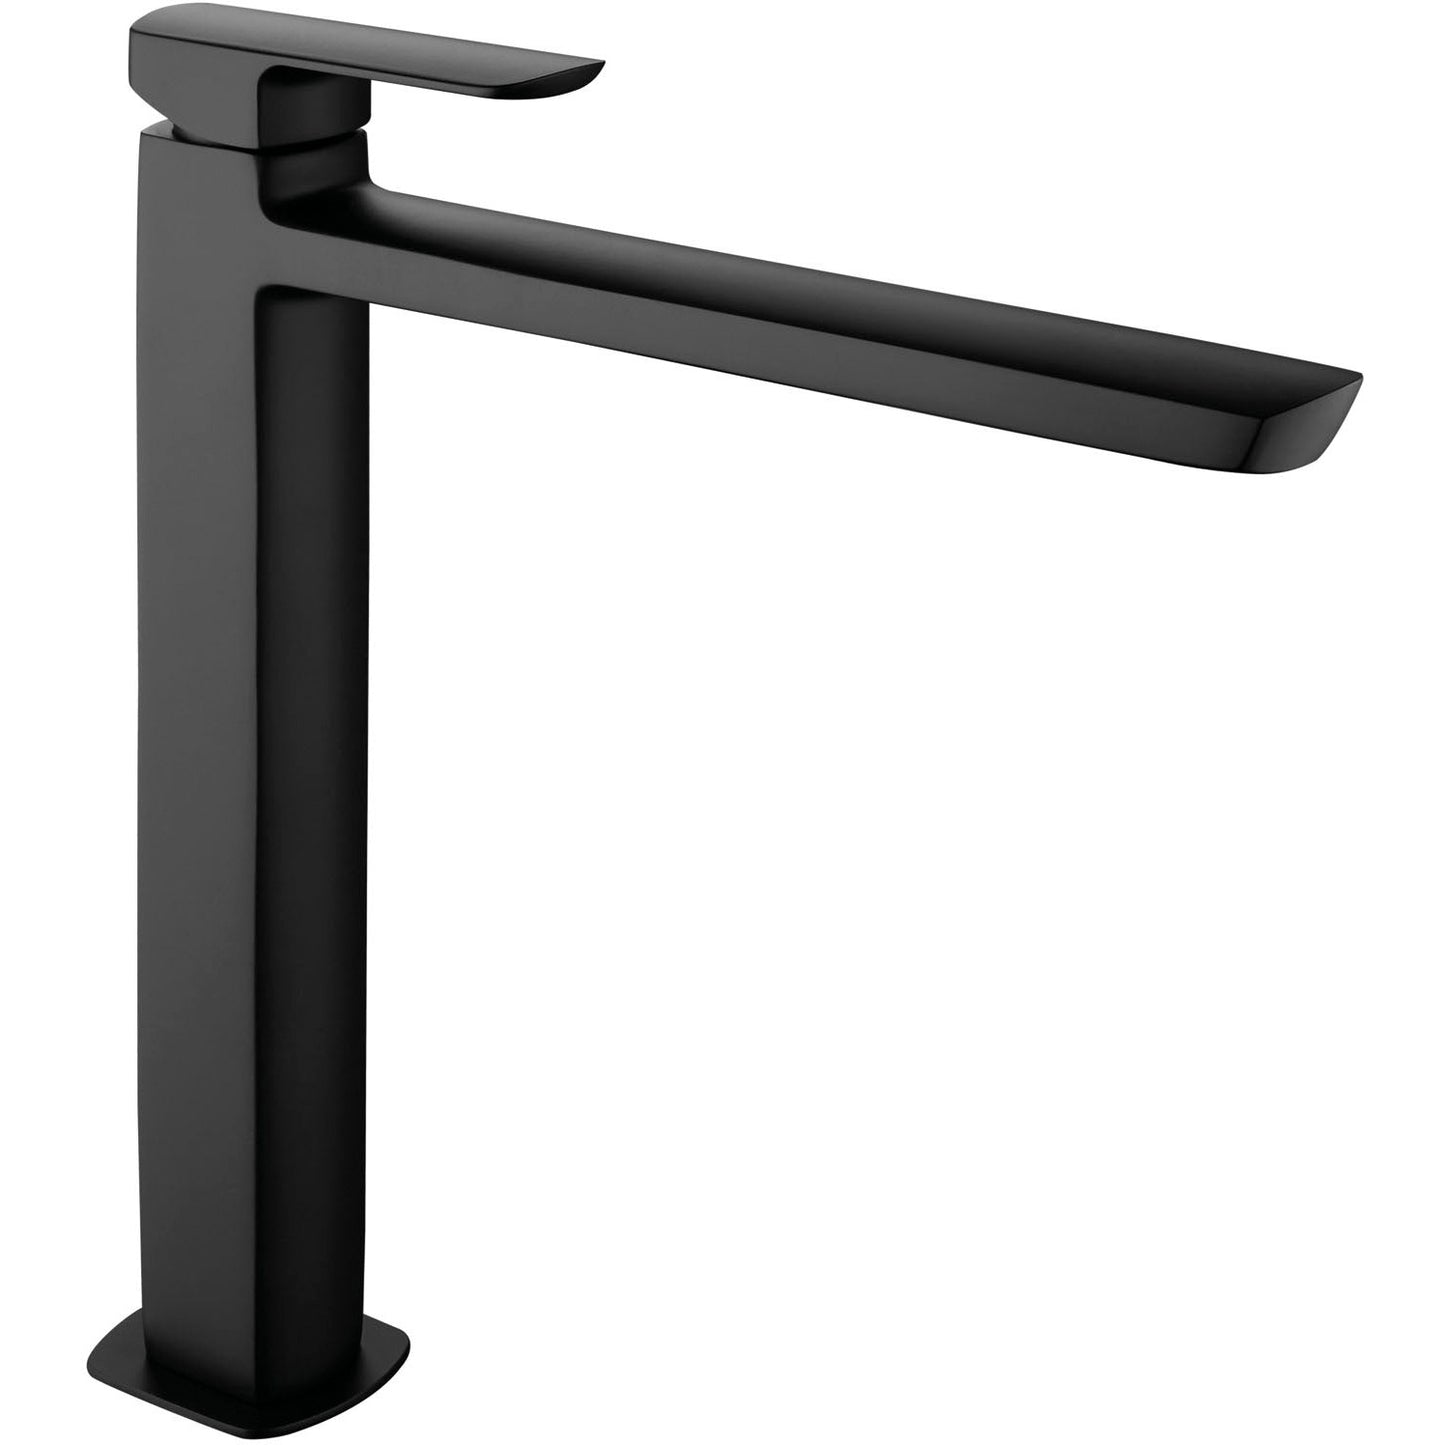 Lavabo faucet MIS tall single lever 563018